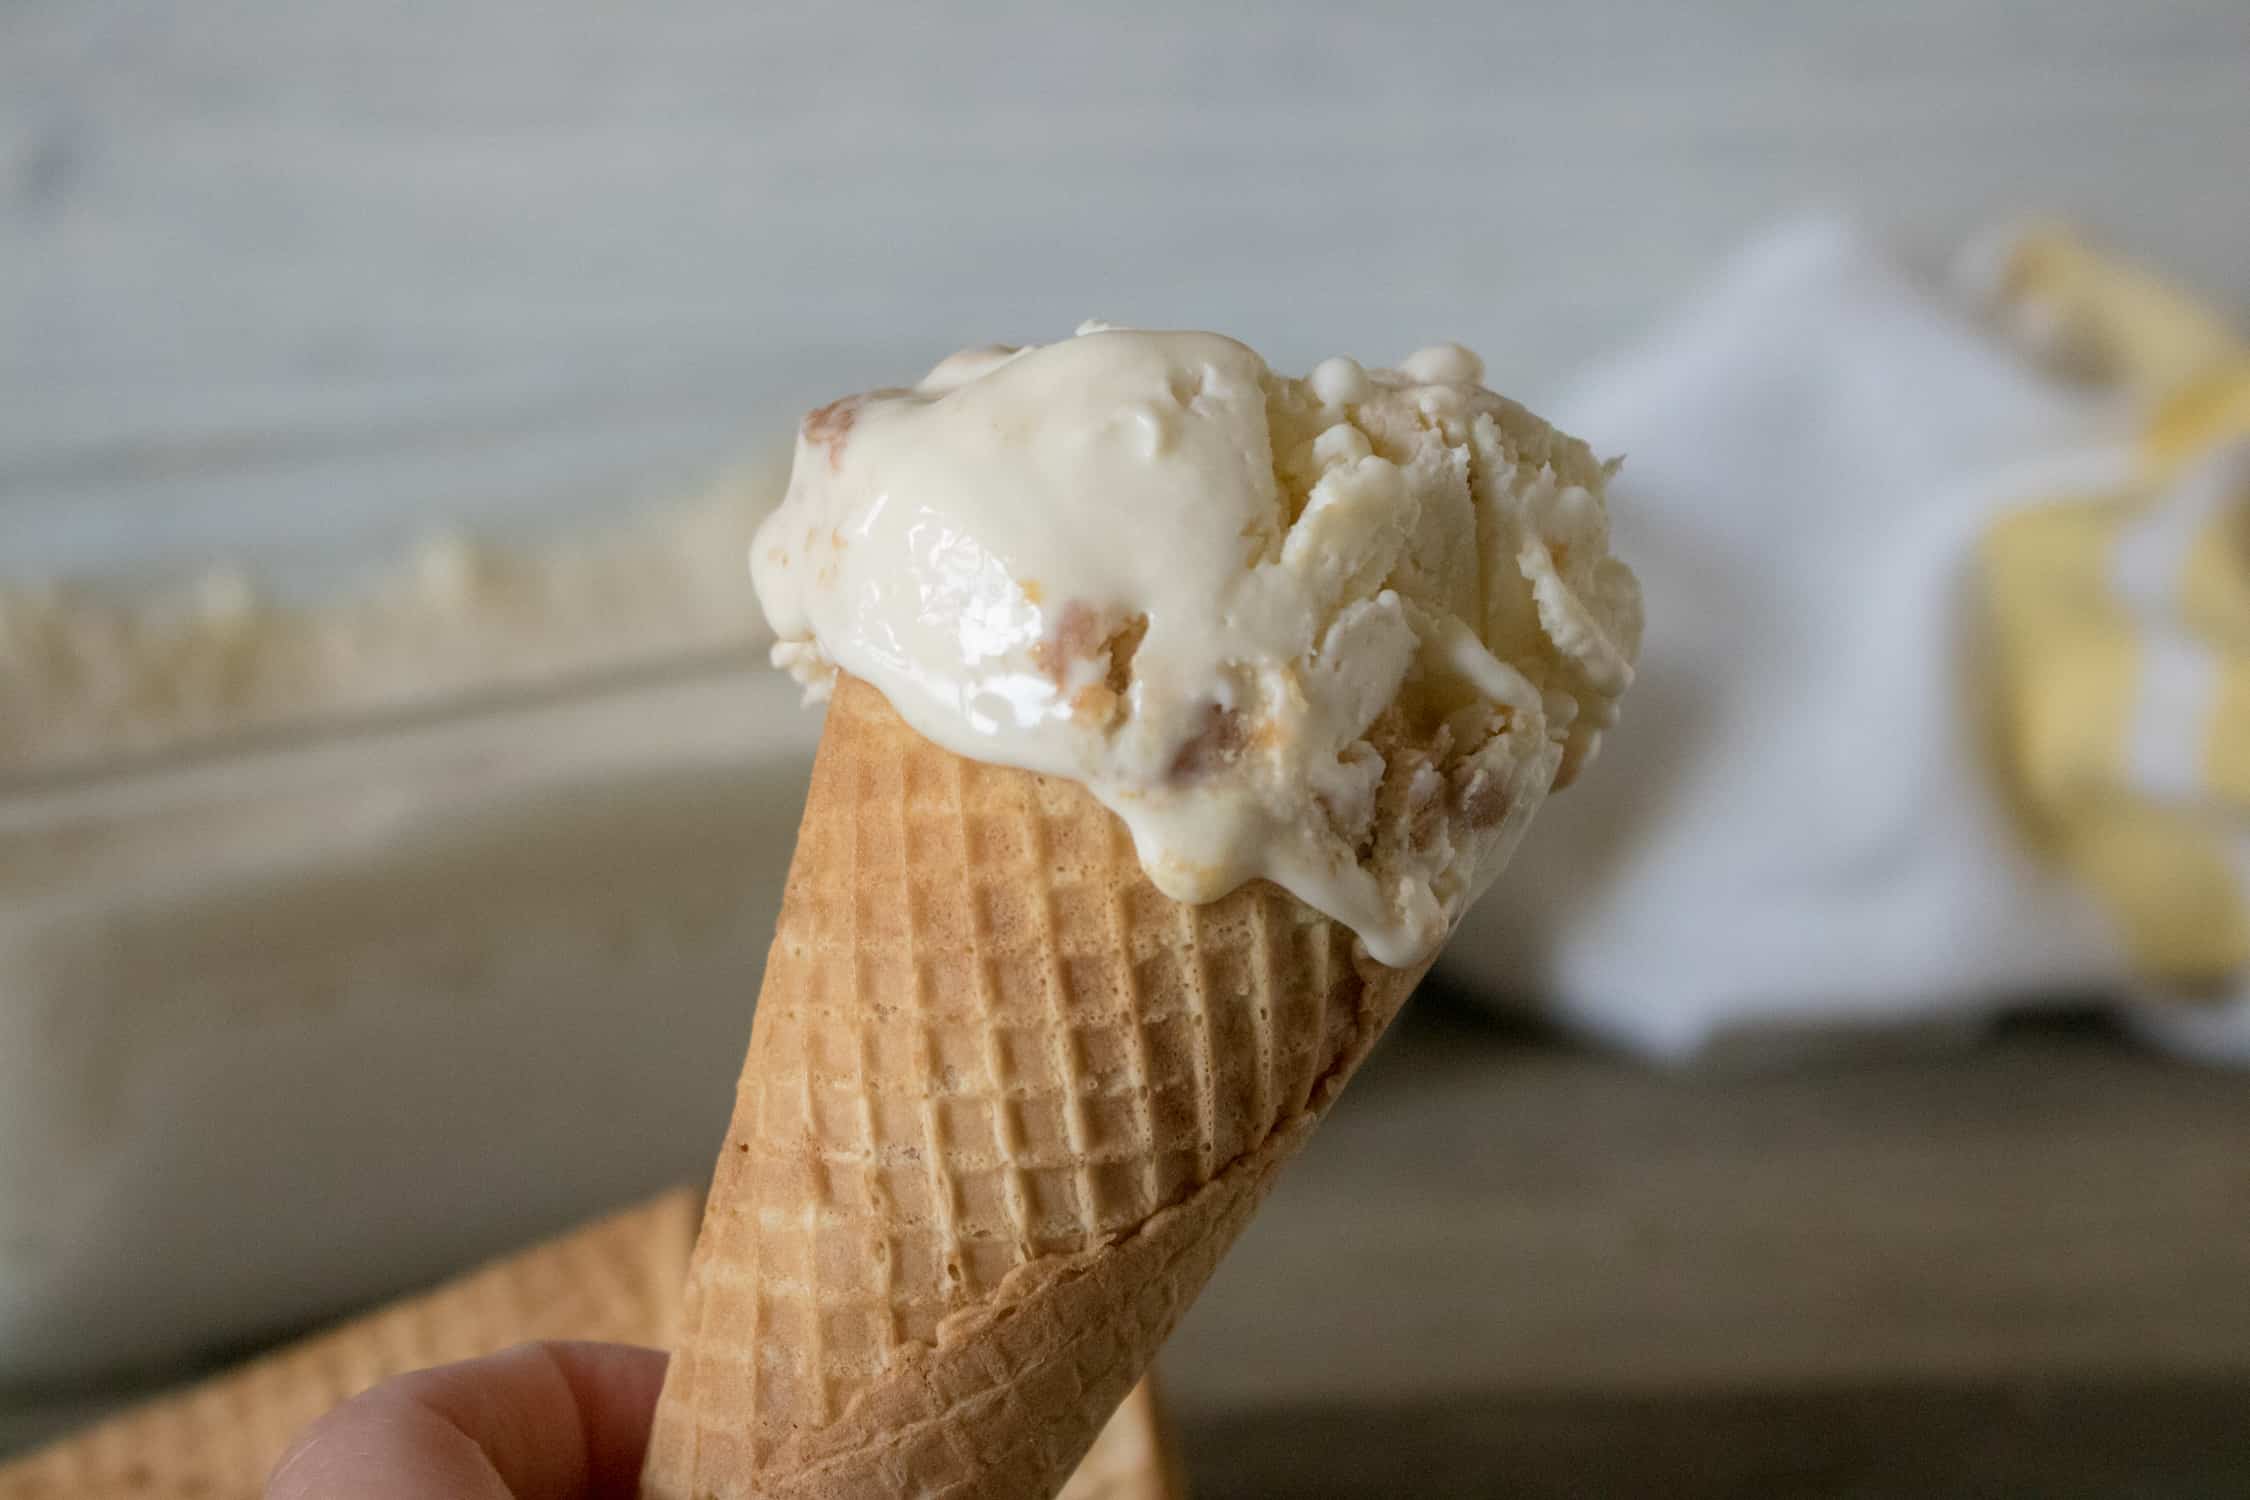 One scoop of Peanut Butter No-Churn Ice Cream served on a sugar cone